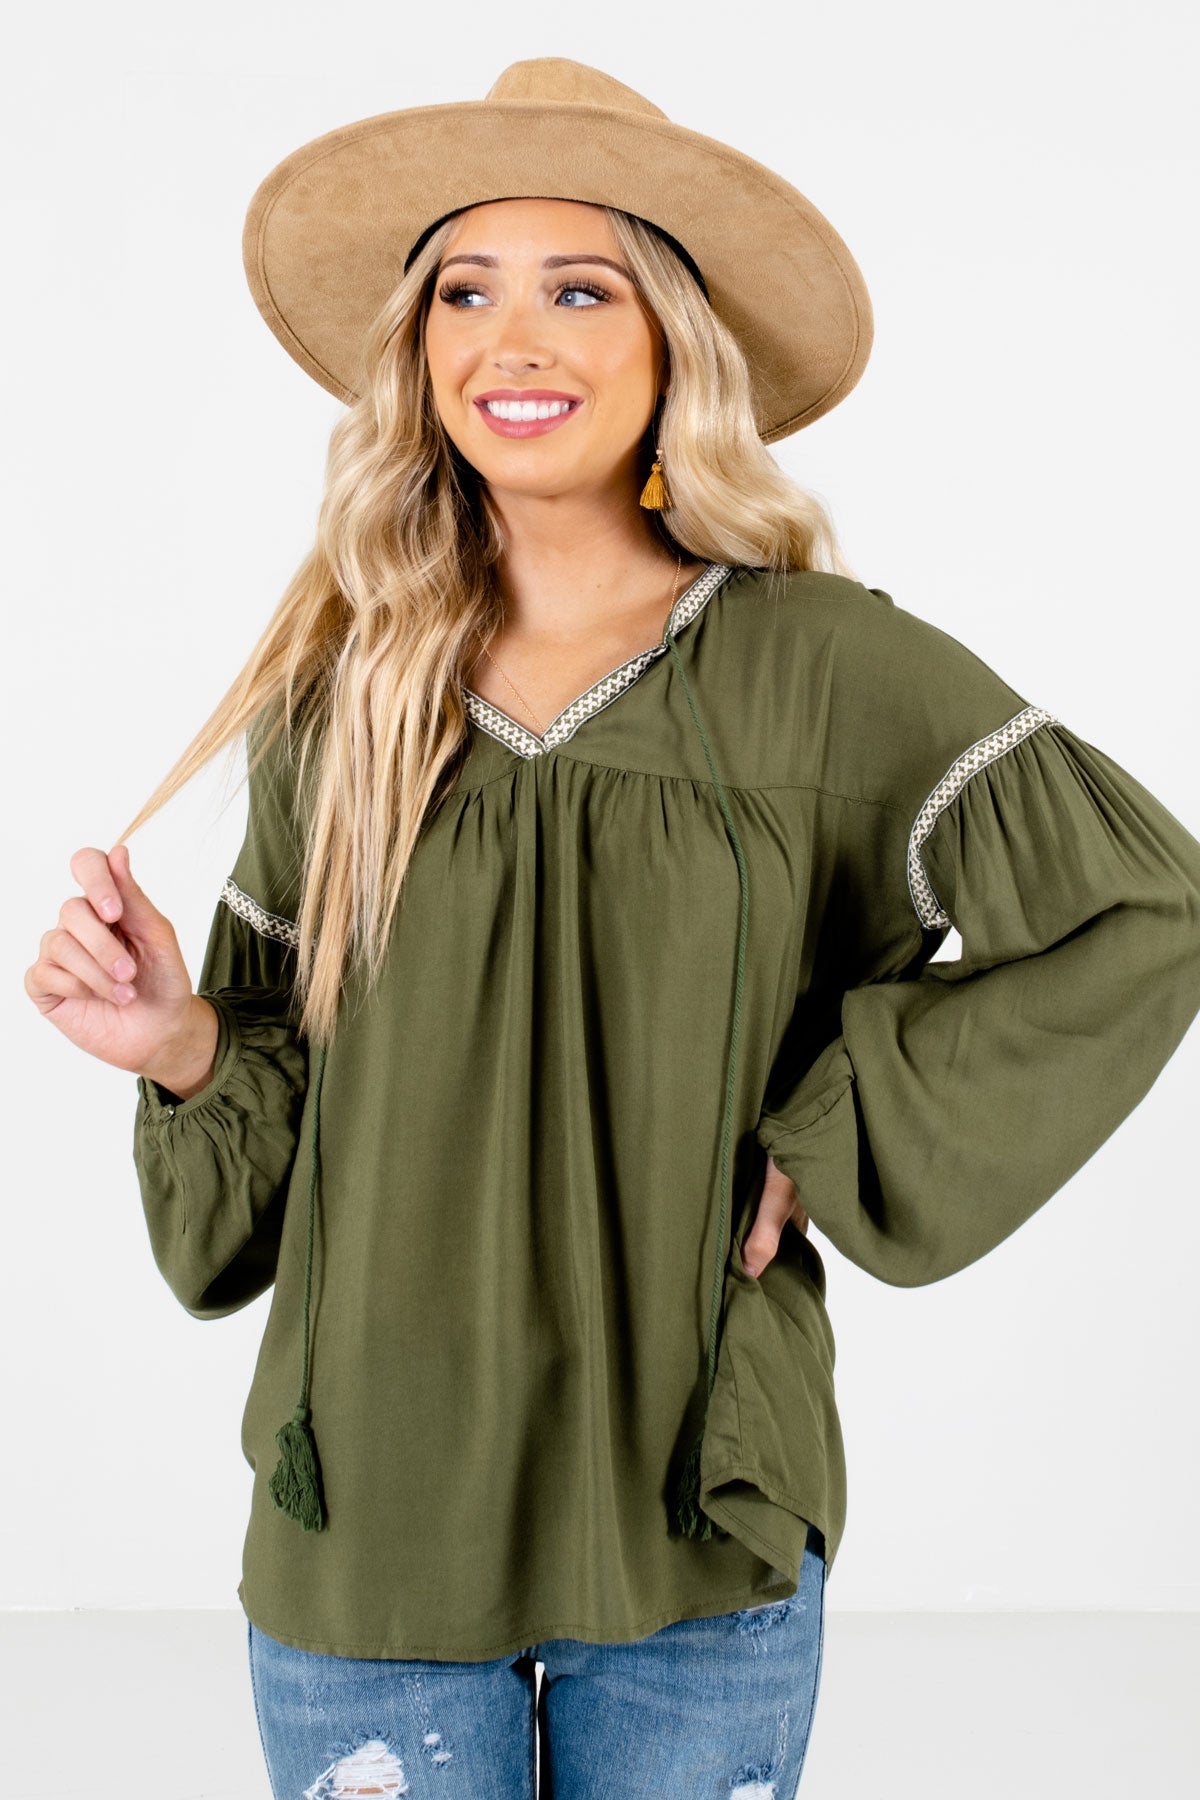 Women’s Olive Green Tassel Tie Accented Boutique Blouse